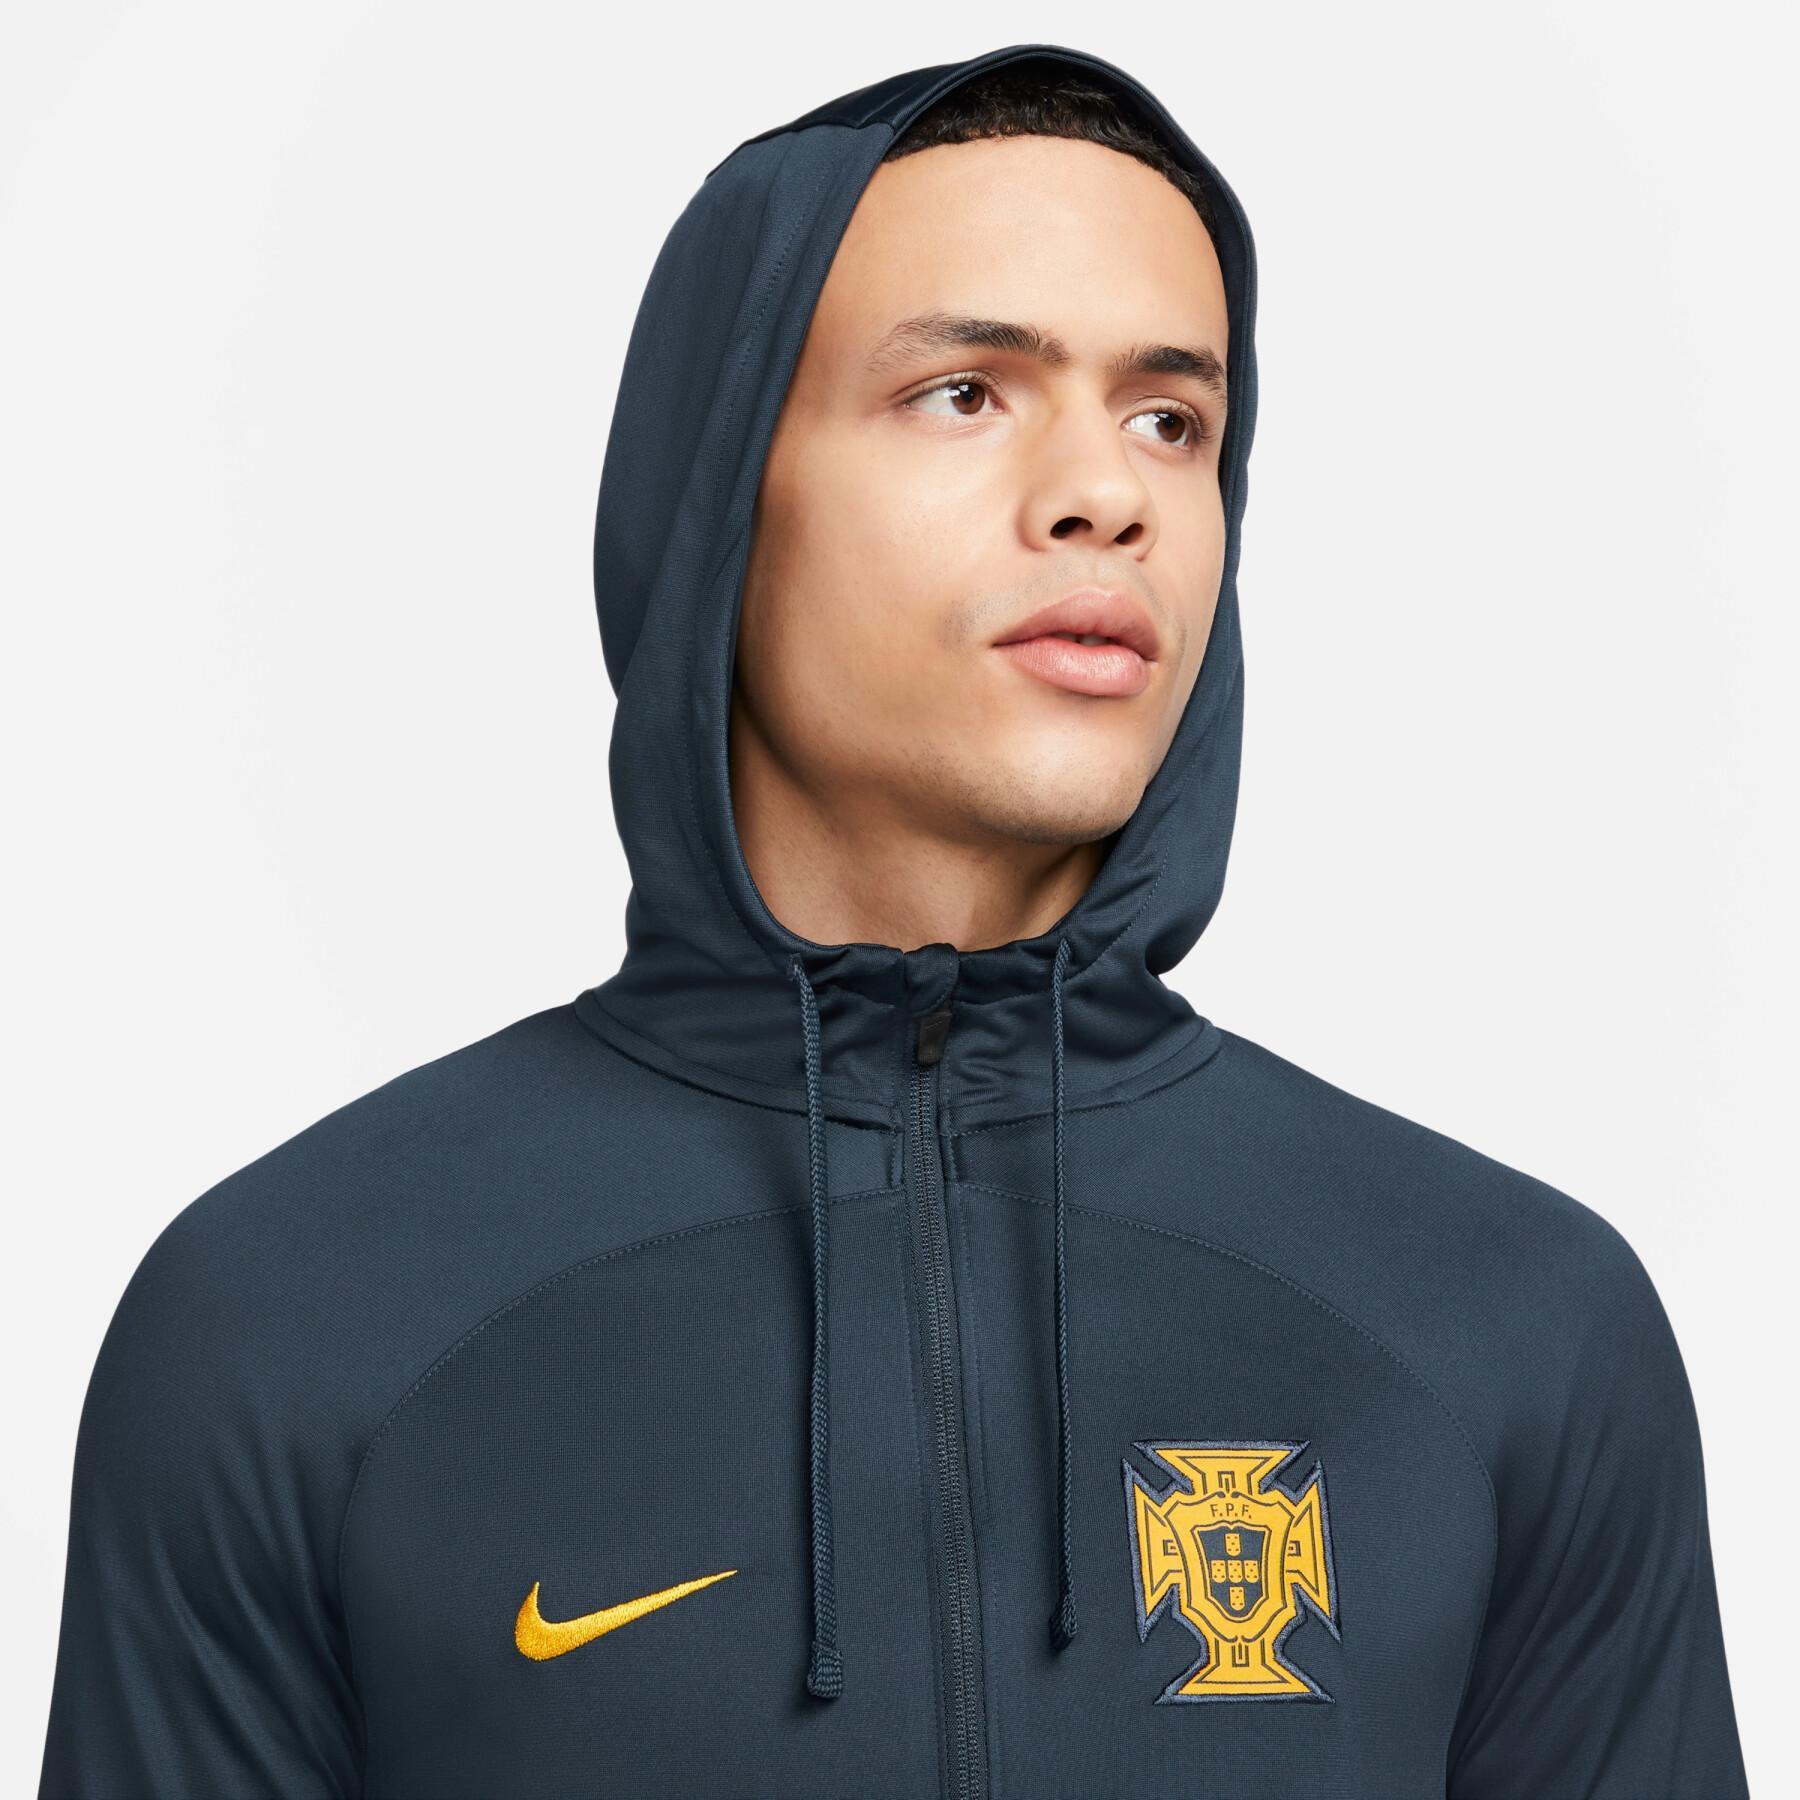 World Cup 2022 tracksuit Portugal